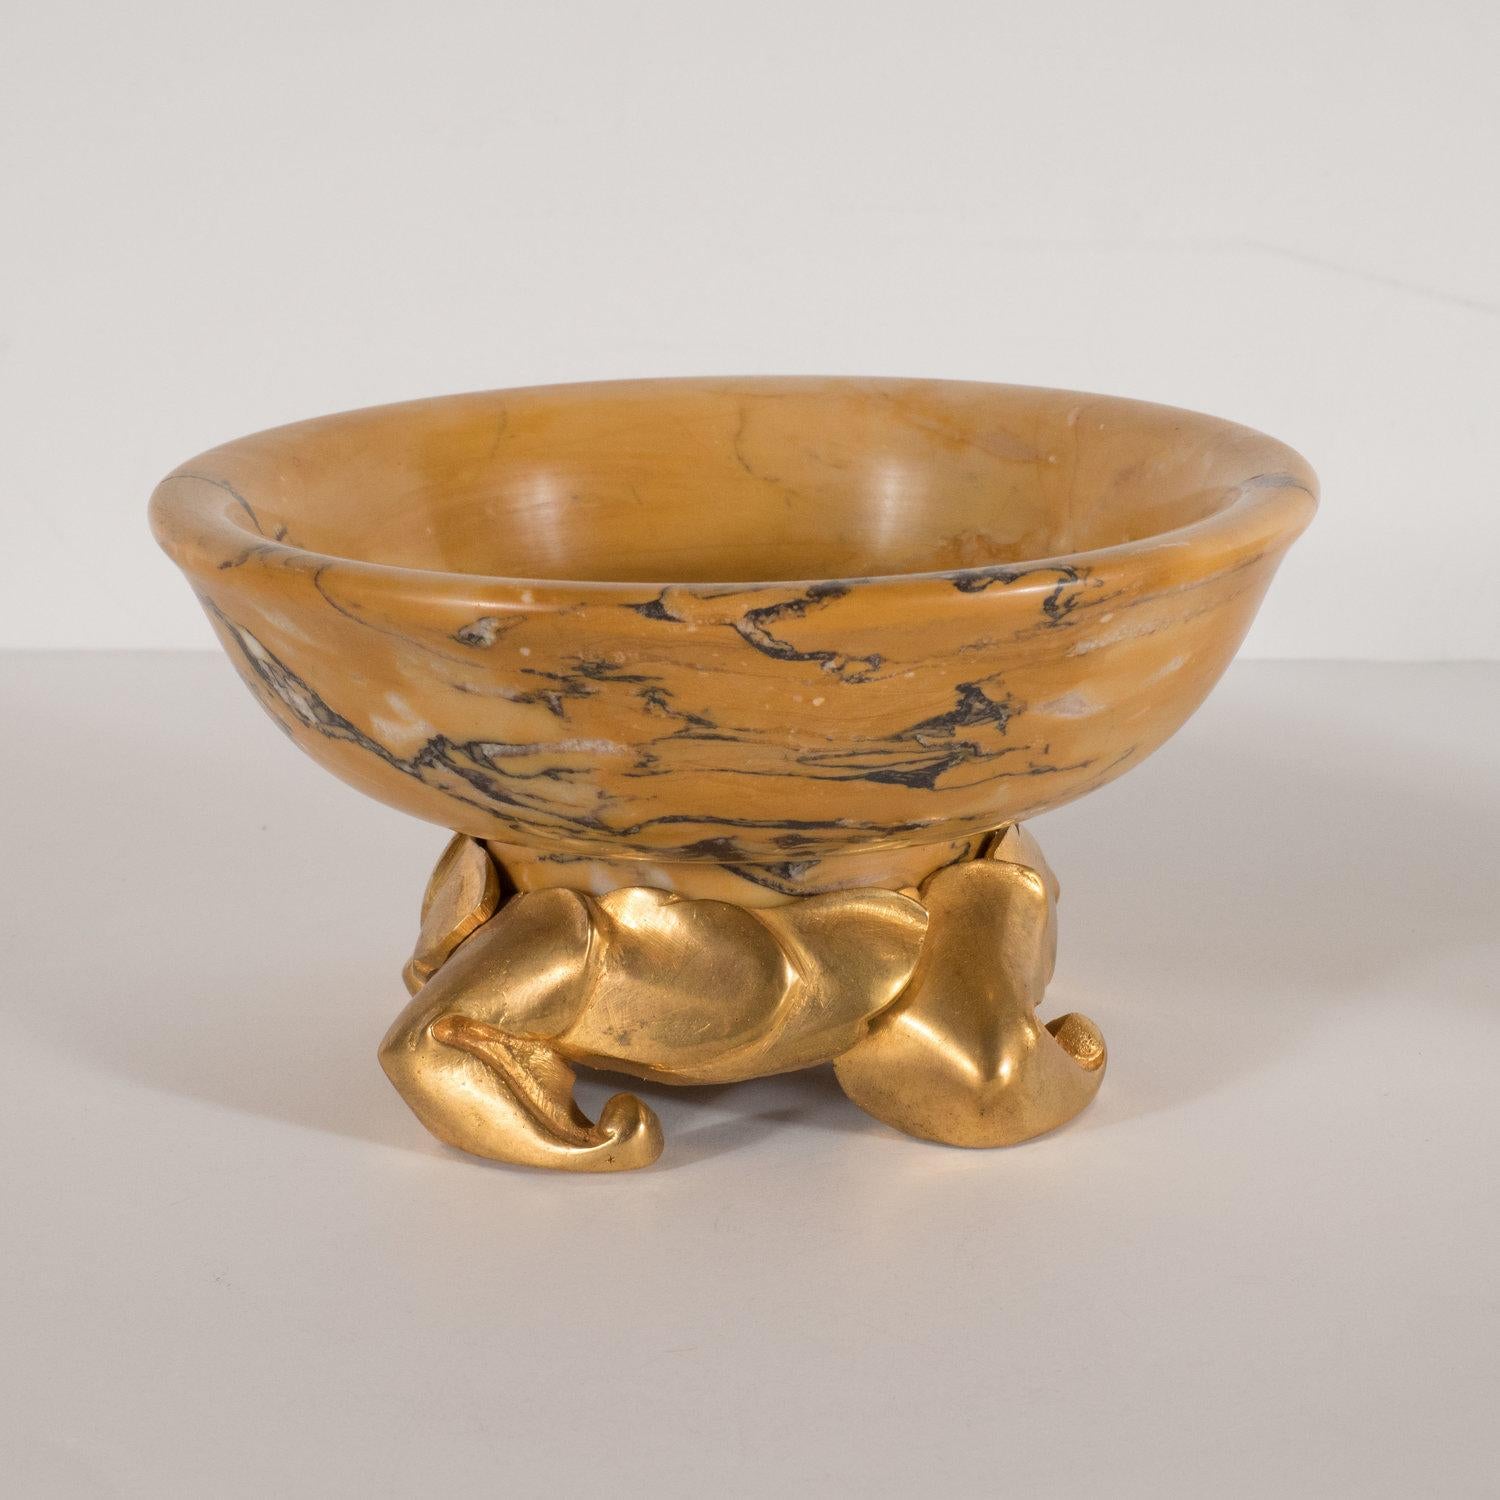 This exquisite pair of decorative dishes were realized in France at the beginning of the 20th century. They feature circular tops with gently reclined sides and a flat bottom carved from amber gold marble with charcoal veins running throughout. The